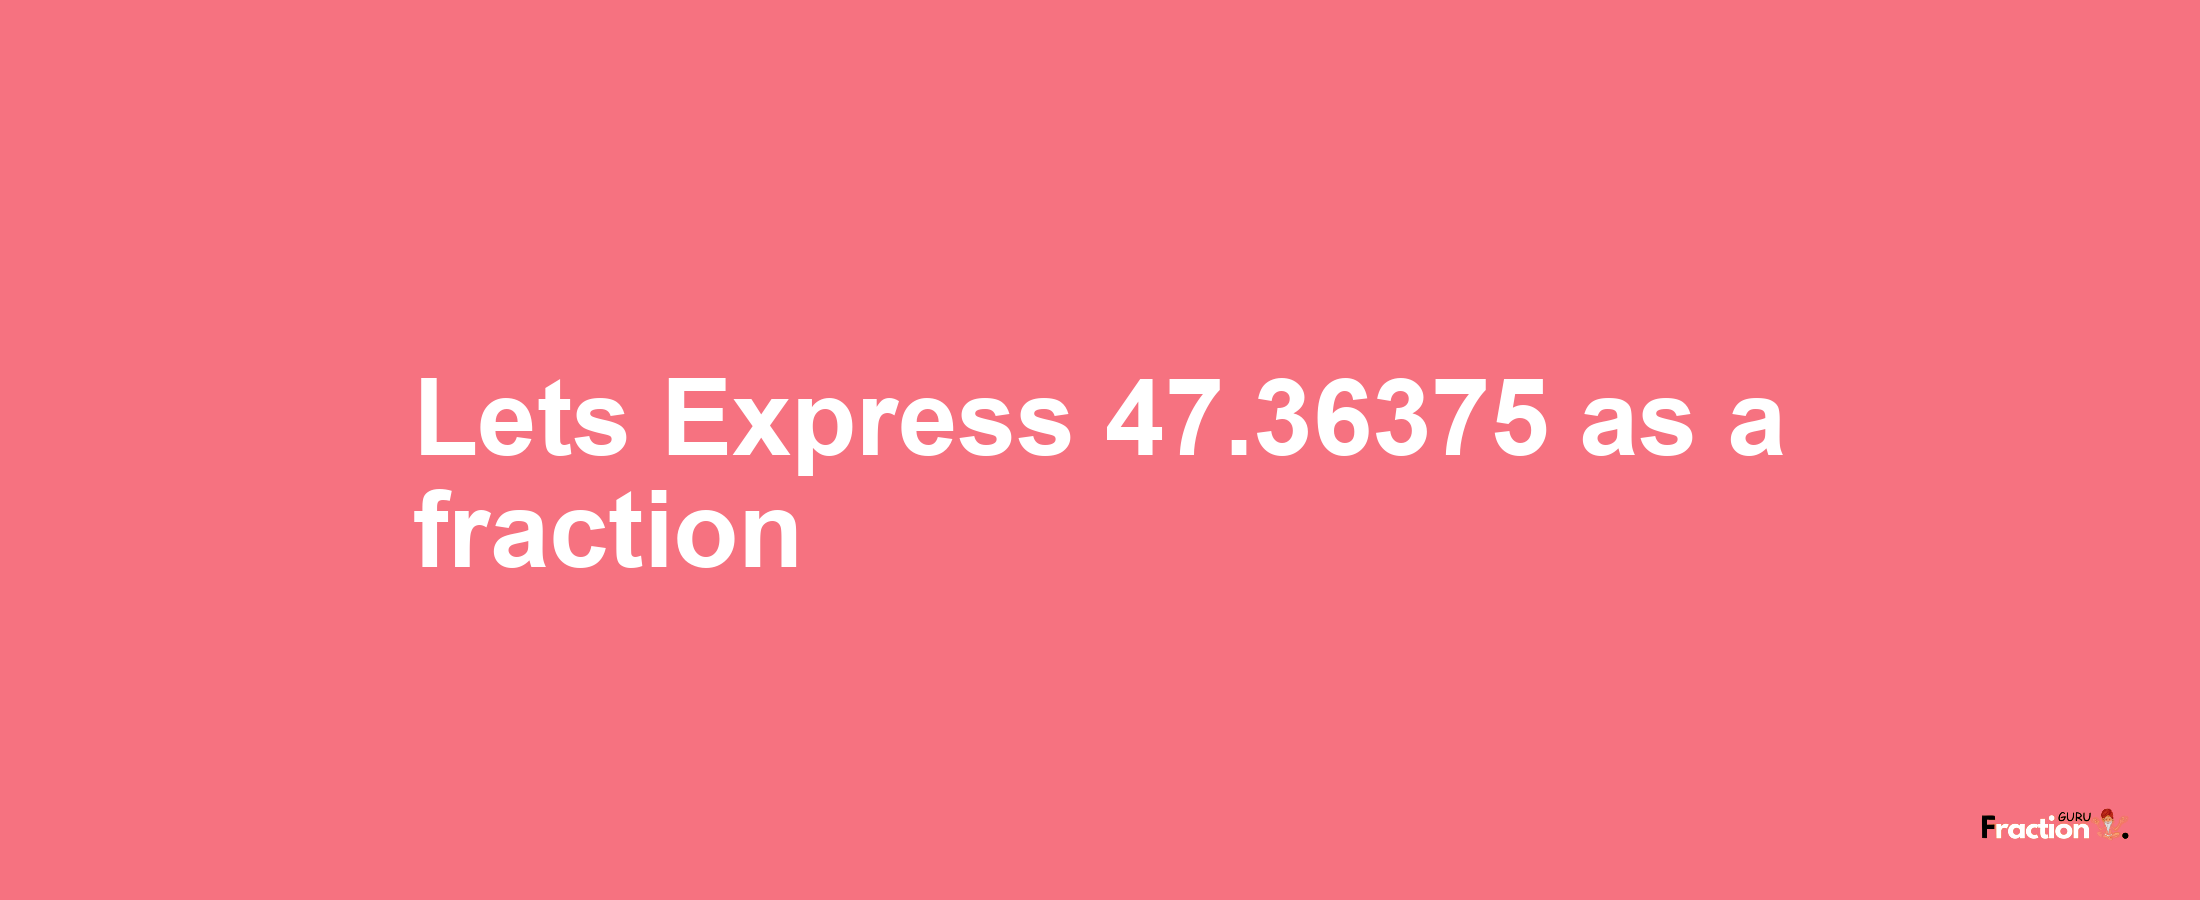 Lets Express 47.36375 as afraction